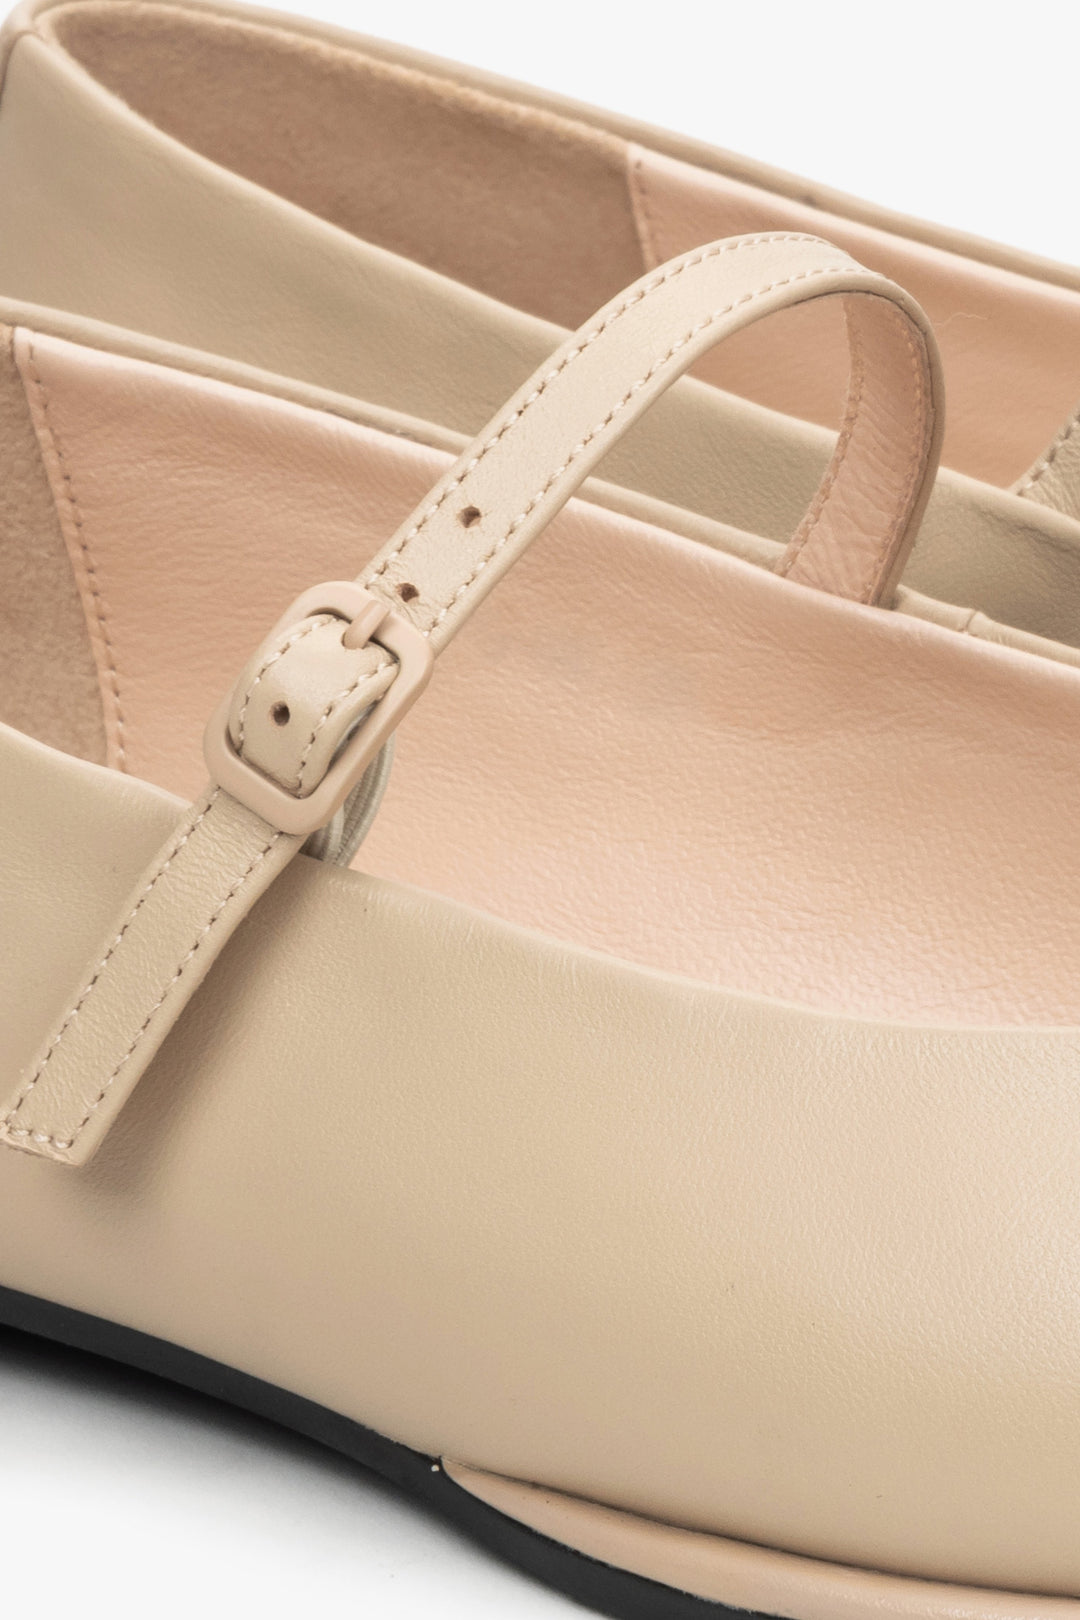 Women's beige ballet flats with a buckle by Estro - close-up on detail.